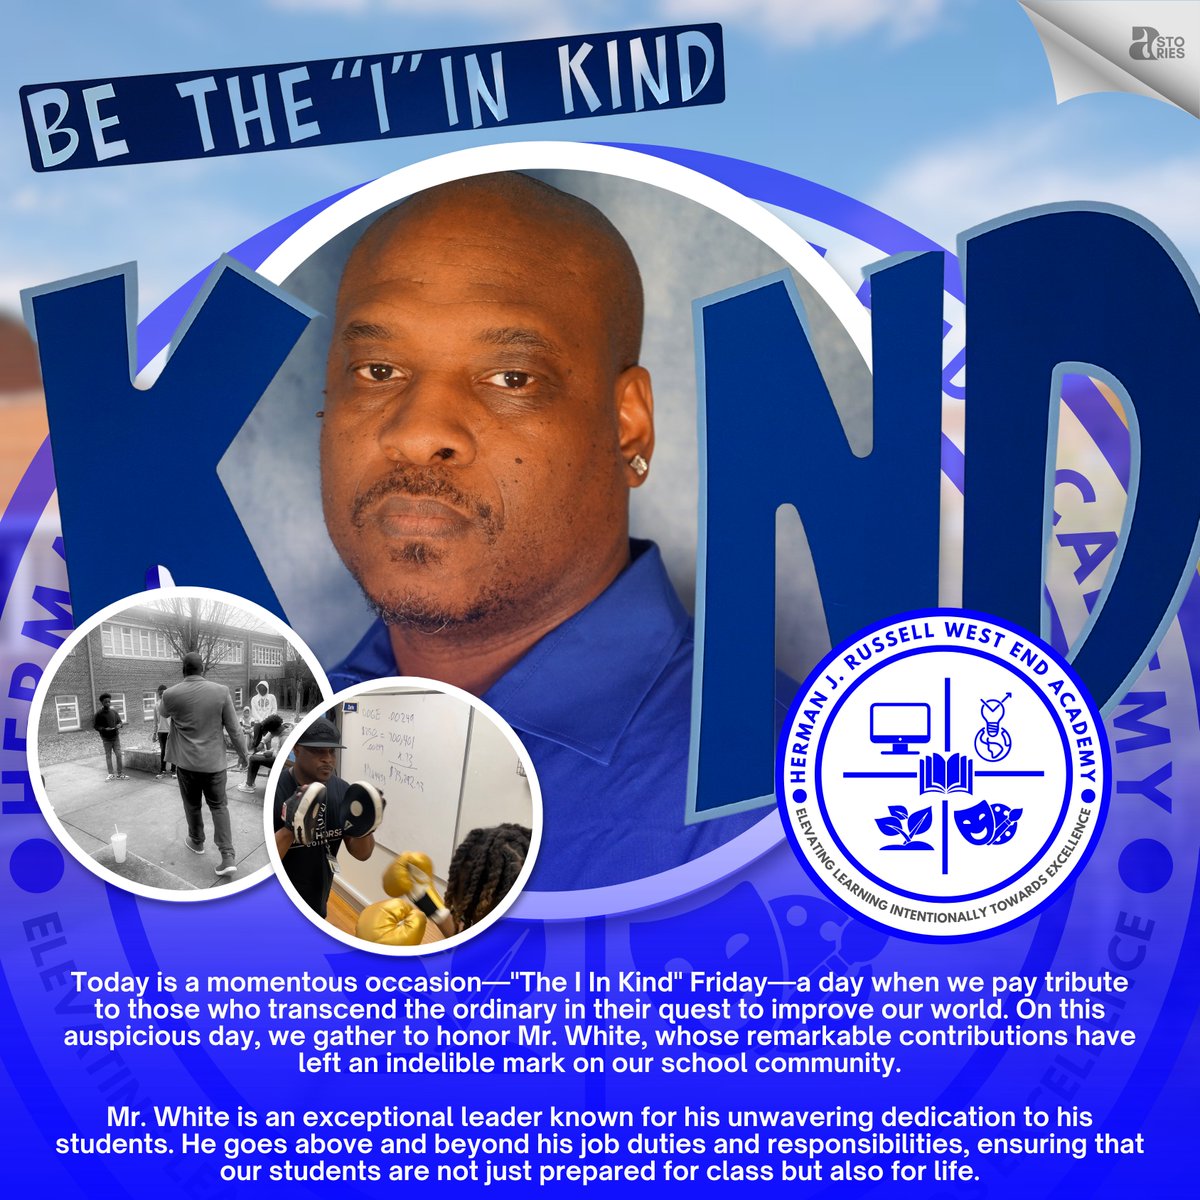 Today is a special day called 'The I In Kind' Friday, where we honor those who go above and beyond to make the world a better place. We are gathered here today to recognize Mr. White, who has made remarkable contributions to our school community.